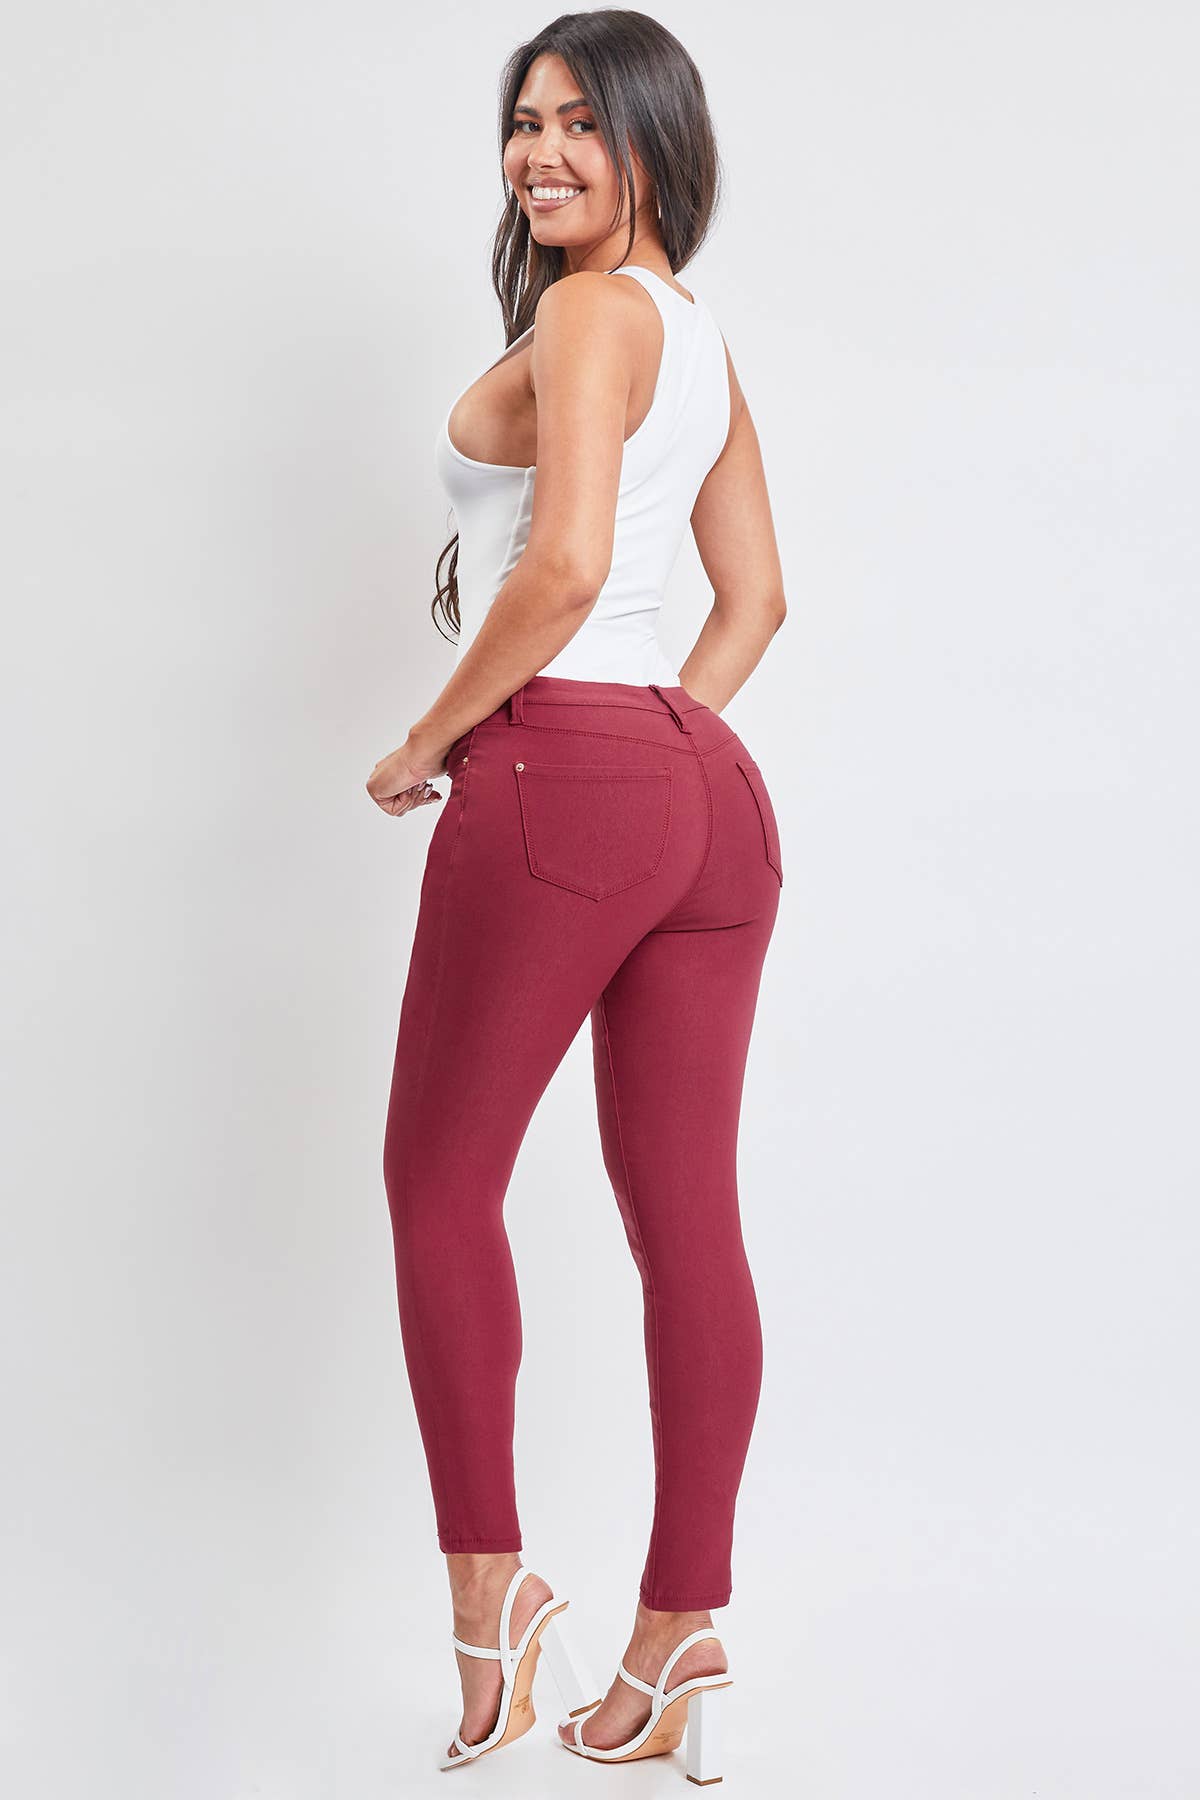 Junior Hyperstretch Mid-Rise Skinny Jean: Small / BROSE